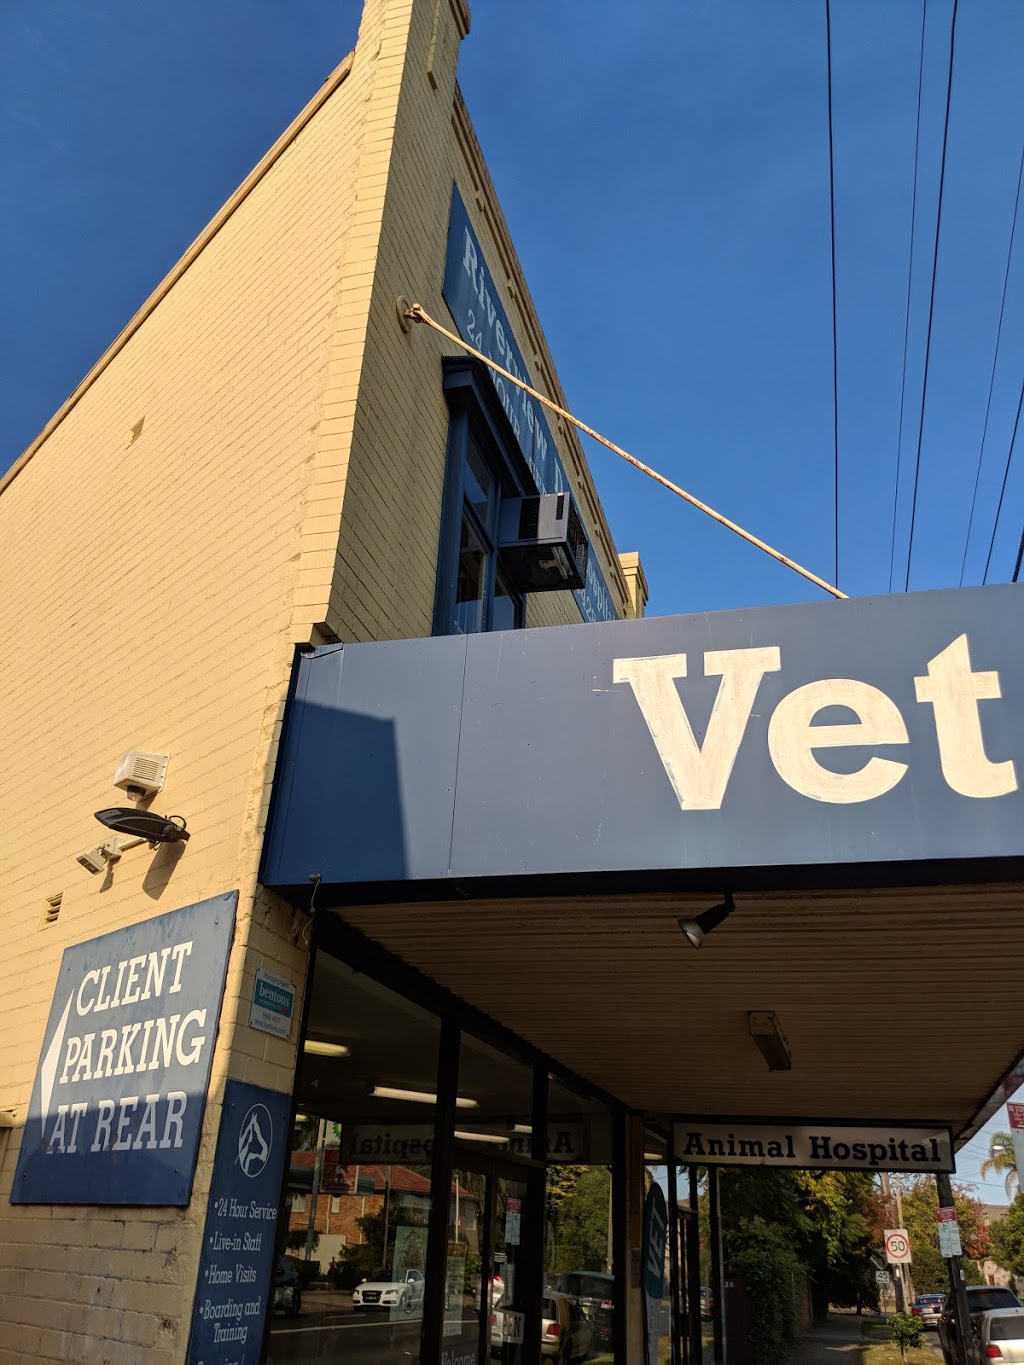 Riverview Animal Hospital | veterinary care | 18 Northwood Rd, Lane Cove NSW 2066, Australia | 0294283375 OR +61 2 9428 3375